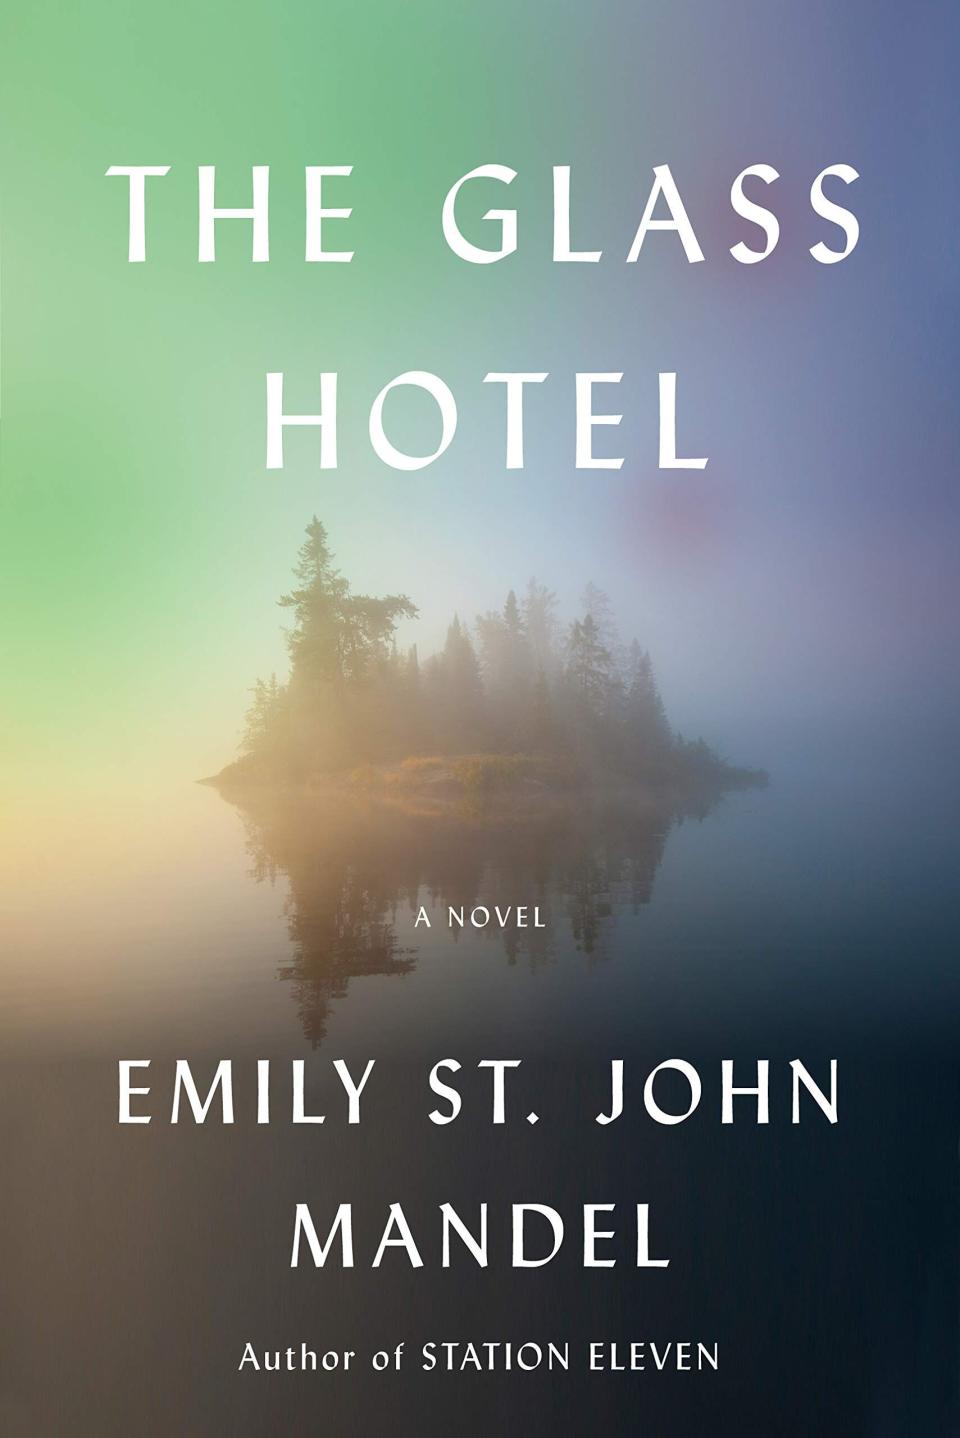 Fans of Emily St. John Mandel&rsquo;s otherworldly and twisting &ldquo;<a href="https://amzn.to/38j7XYh" target="_blank" rel="noopener noreferrer">Station Eleven</a>&rdquo; will be thrilled to see her fifth novel, &ldquo;The Glass Hotel,&rdquo; published in March 2020. Goodreads calls it &ldquo;a captivating novel of money, beauty, white-collar crime, ghosts, and moral compromise in which a woman disappears from a container ship off the coast of Mauritania and a massive Ponzi scheme implodes in New York, dragging countless fortunes with it.&rdquo; Read more about it on <a href="https://www.goodreads.com/book/show/45754981-the-glass-hotel" target="_blank" rel="noopener noreferrer">Goodreads</a>, and <a href="https://amzn.to/2wVNQCn" target="_blank" rel="noopener noreferrer">grab a copy on Amazon</a>.&nbsp;<br /><br /><i>Expected release date: March 24</i>